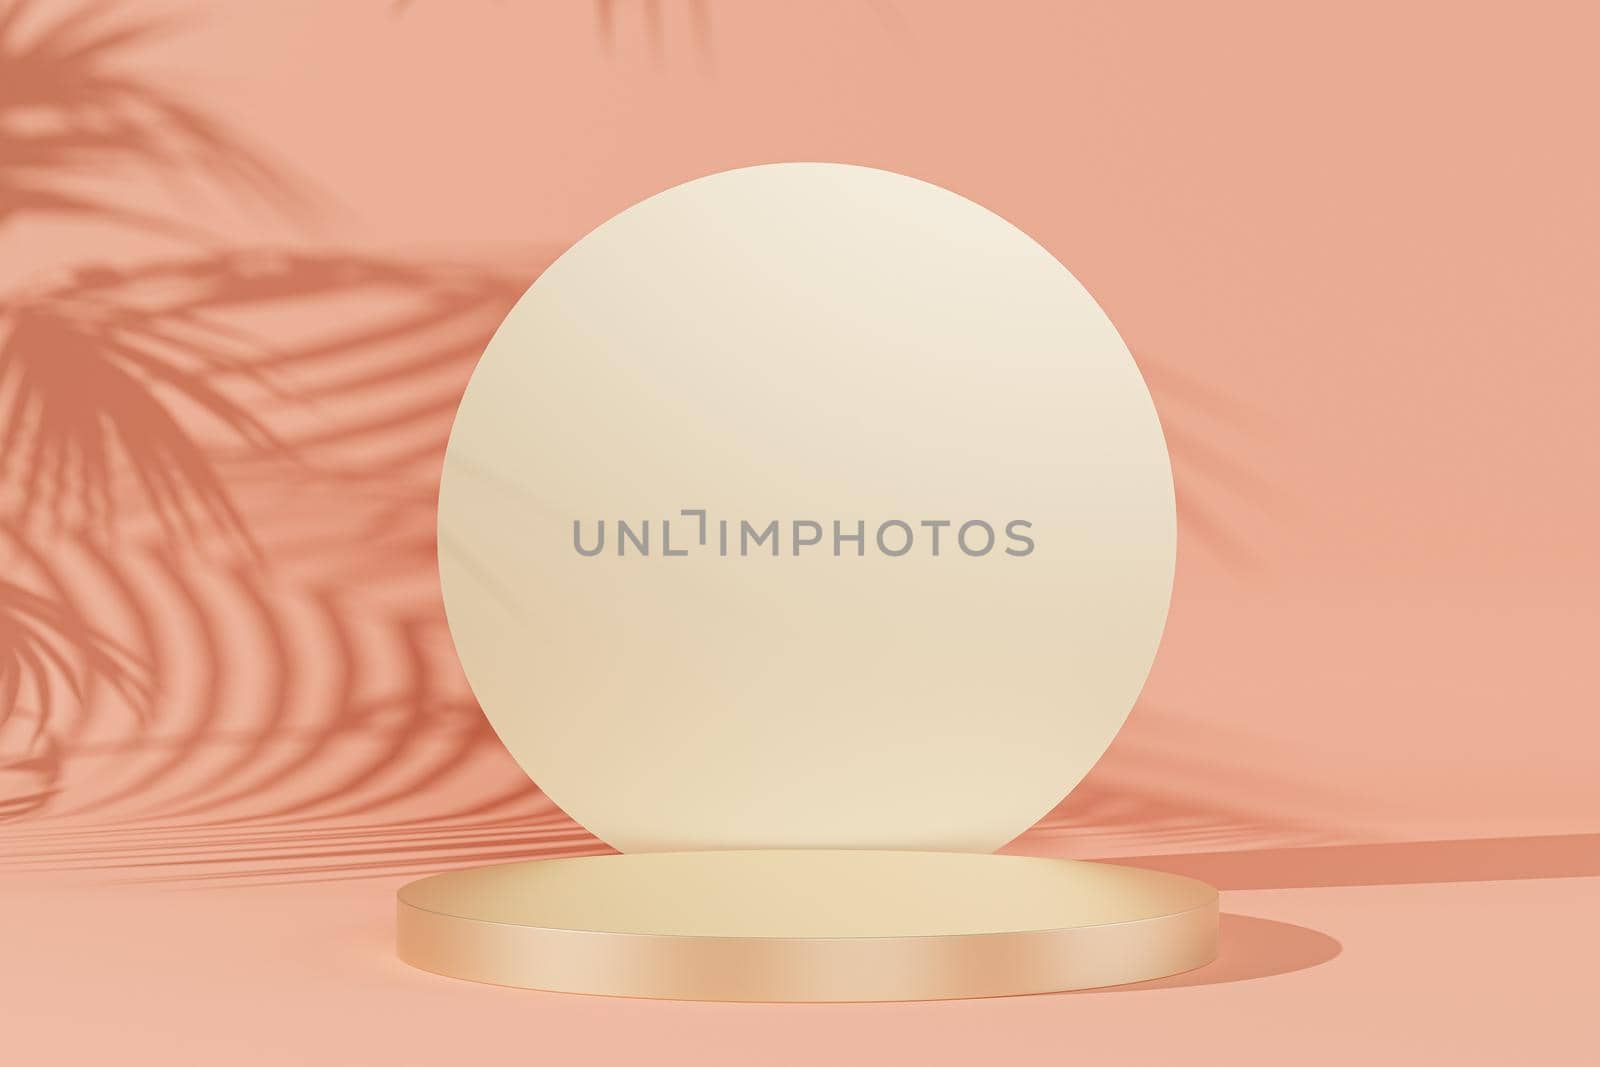 Golden podium or pedestal for products or advertising on peach pink background with leaves shadows, 3d illustration render by Frostroomhead